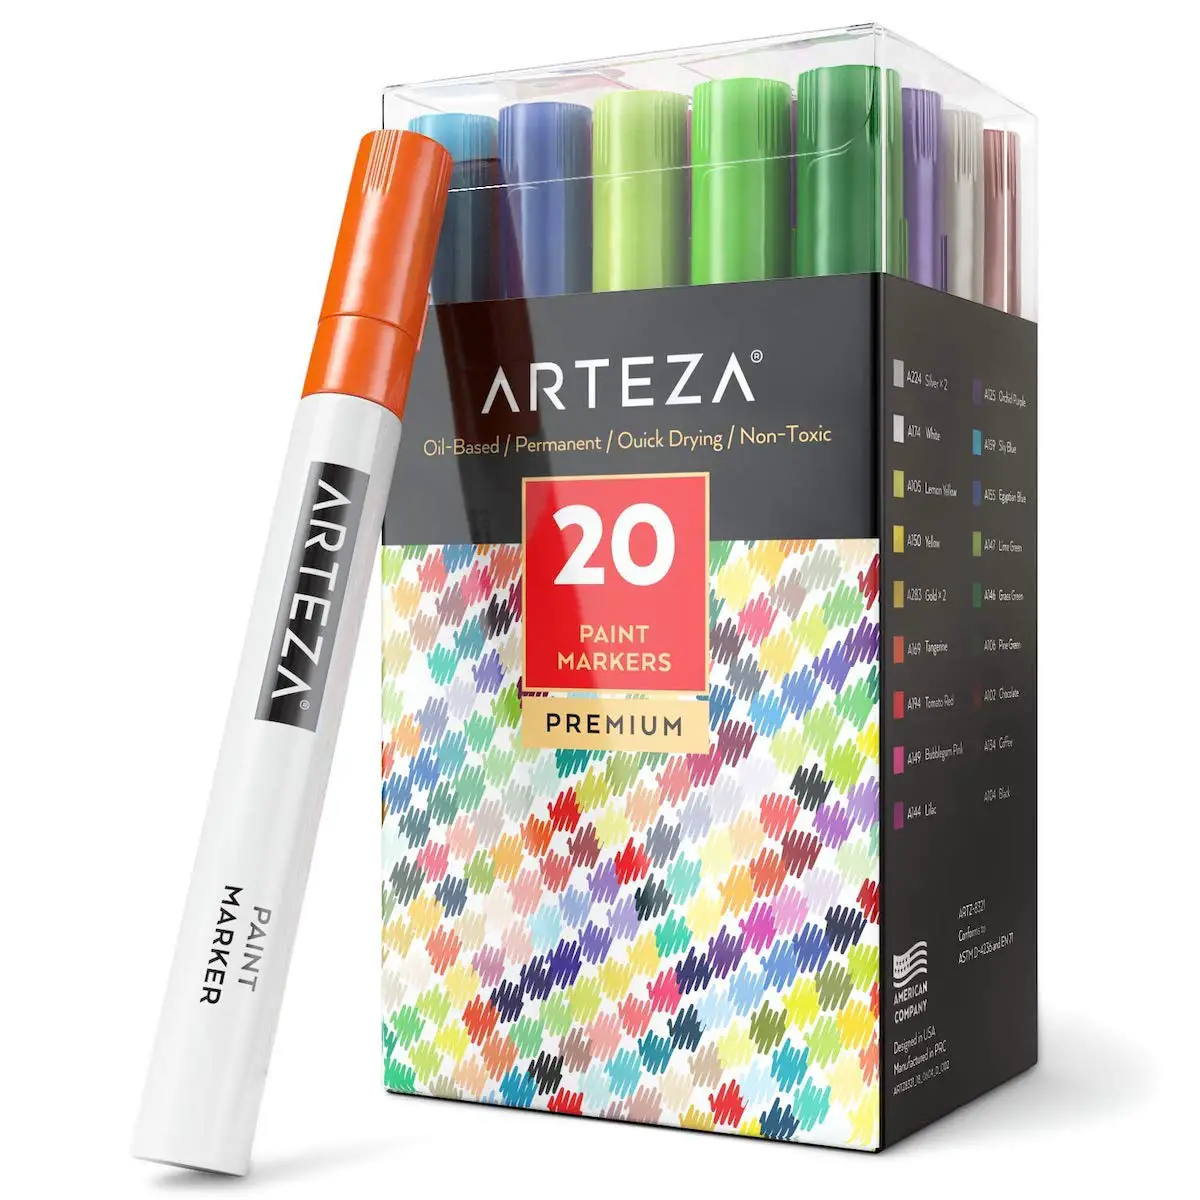  ARTEZA Acrylic Paint Pens, Pack of 2, Black, 3-in-1